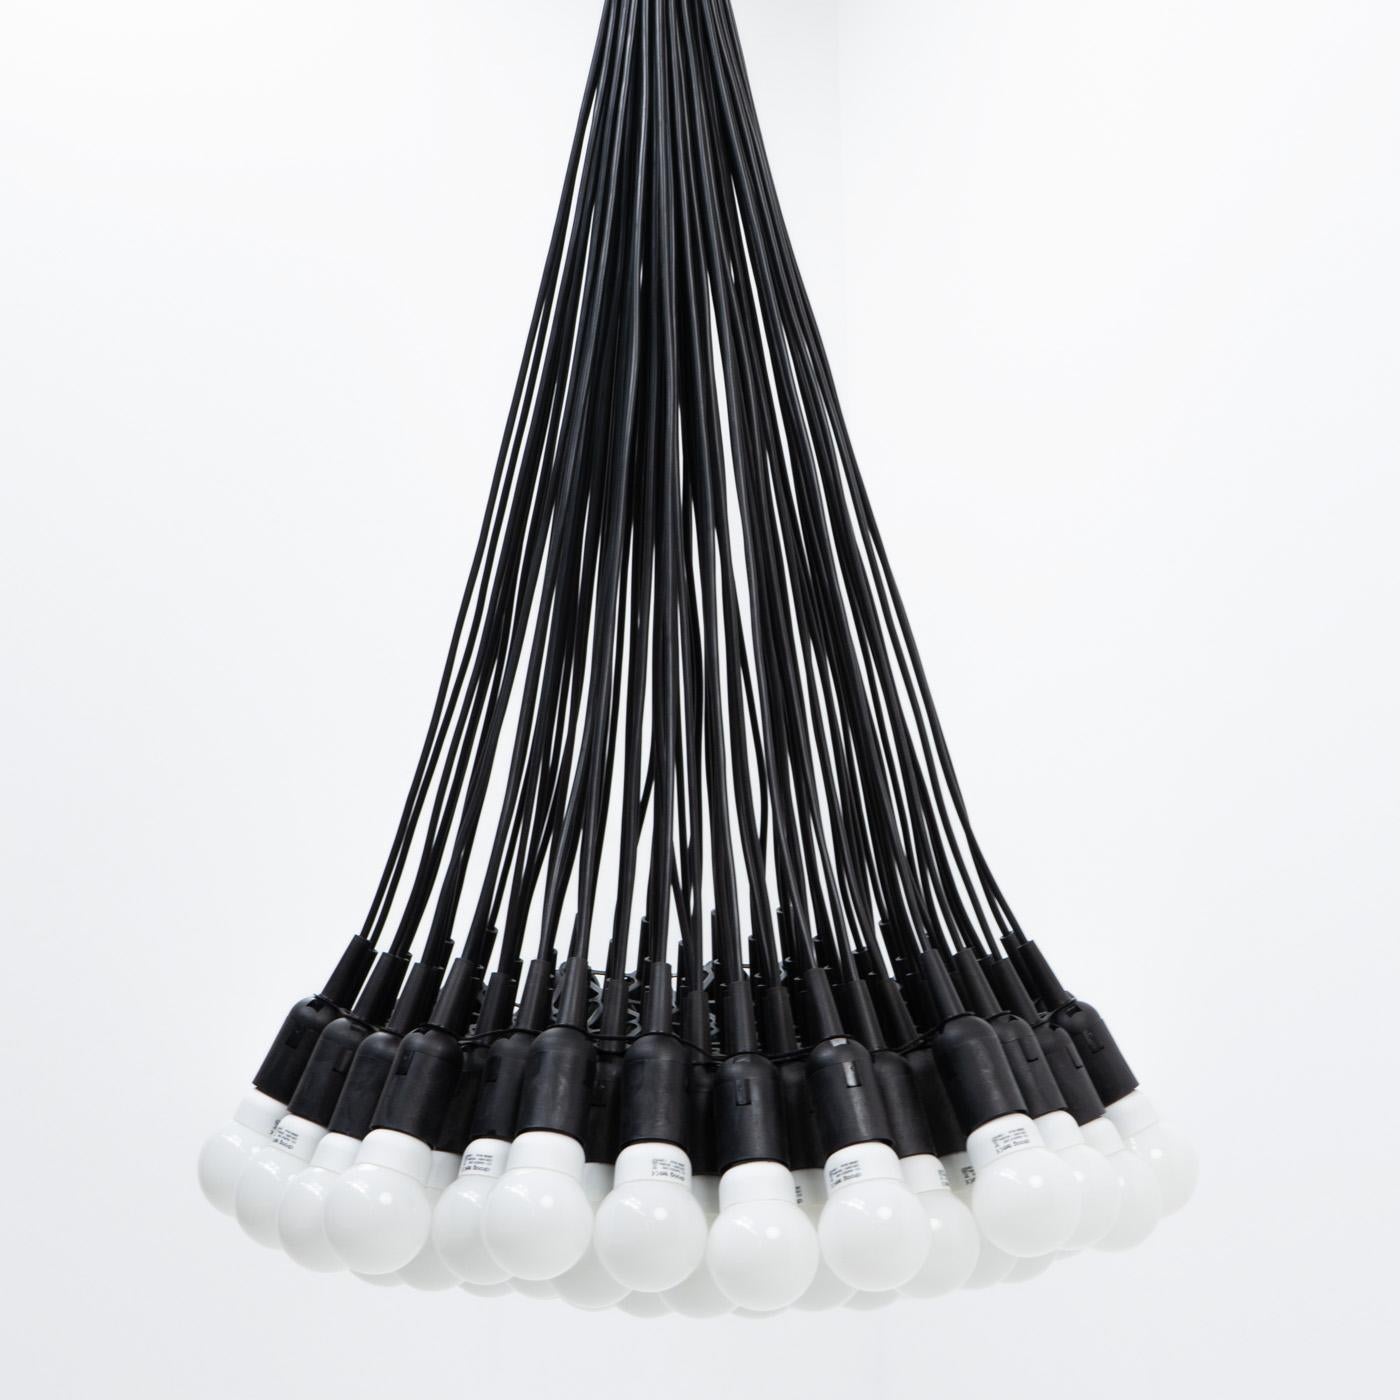 Plastic 85 LED Lamps, by Rody Graumans for Droog design -  1990s For Sale